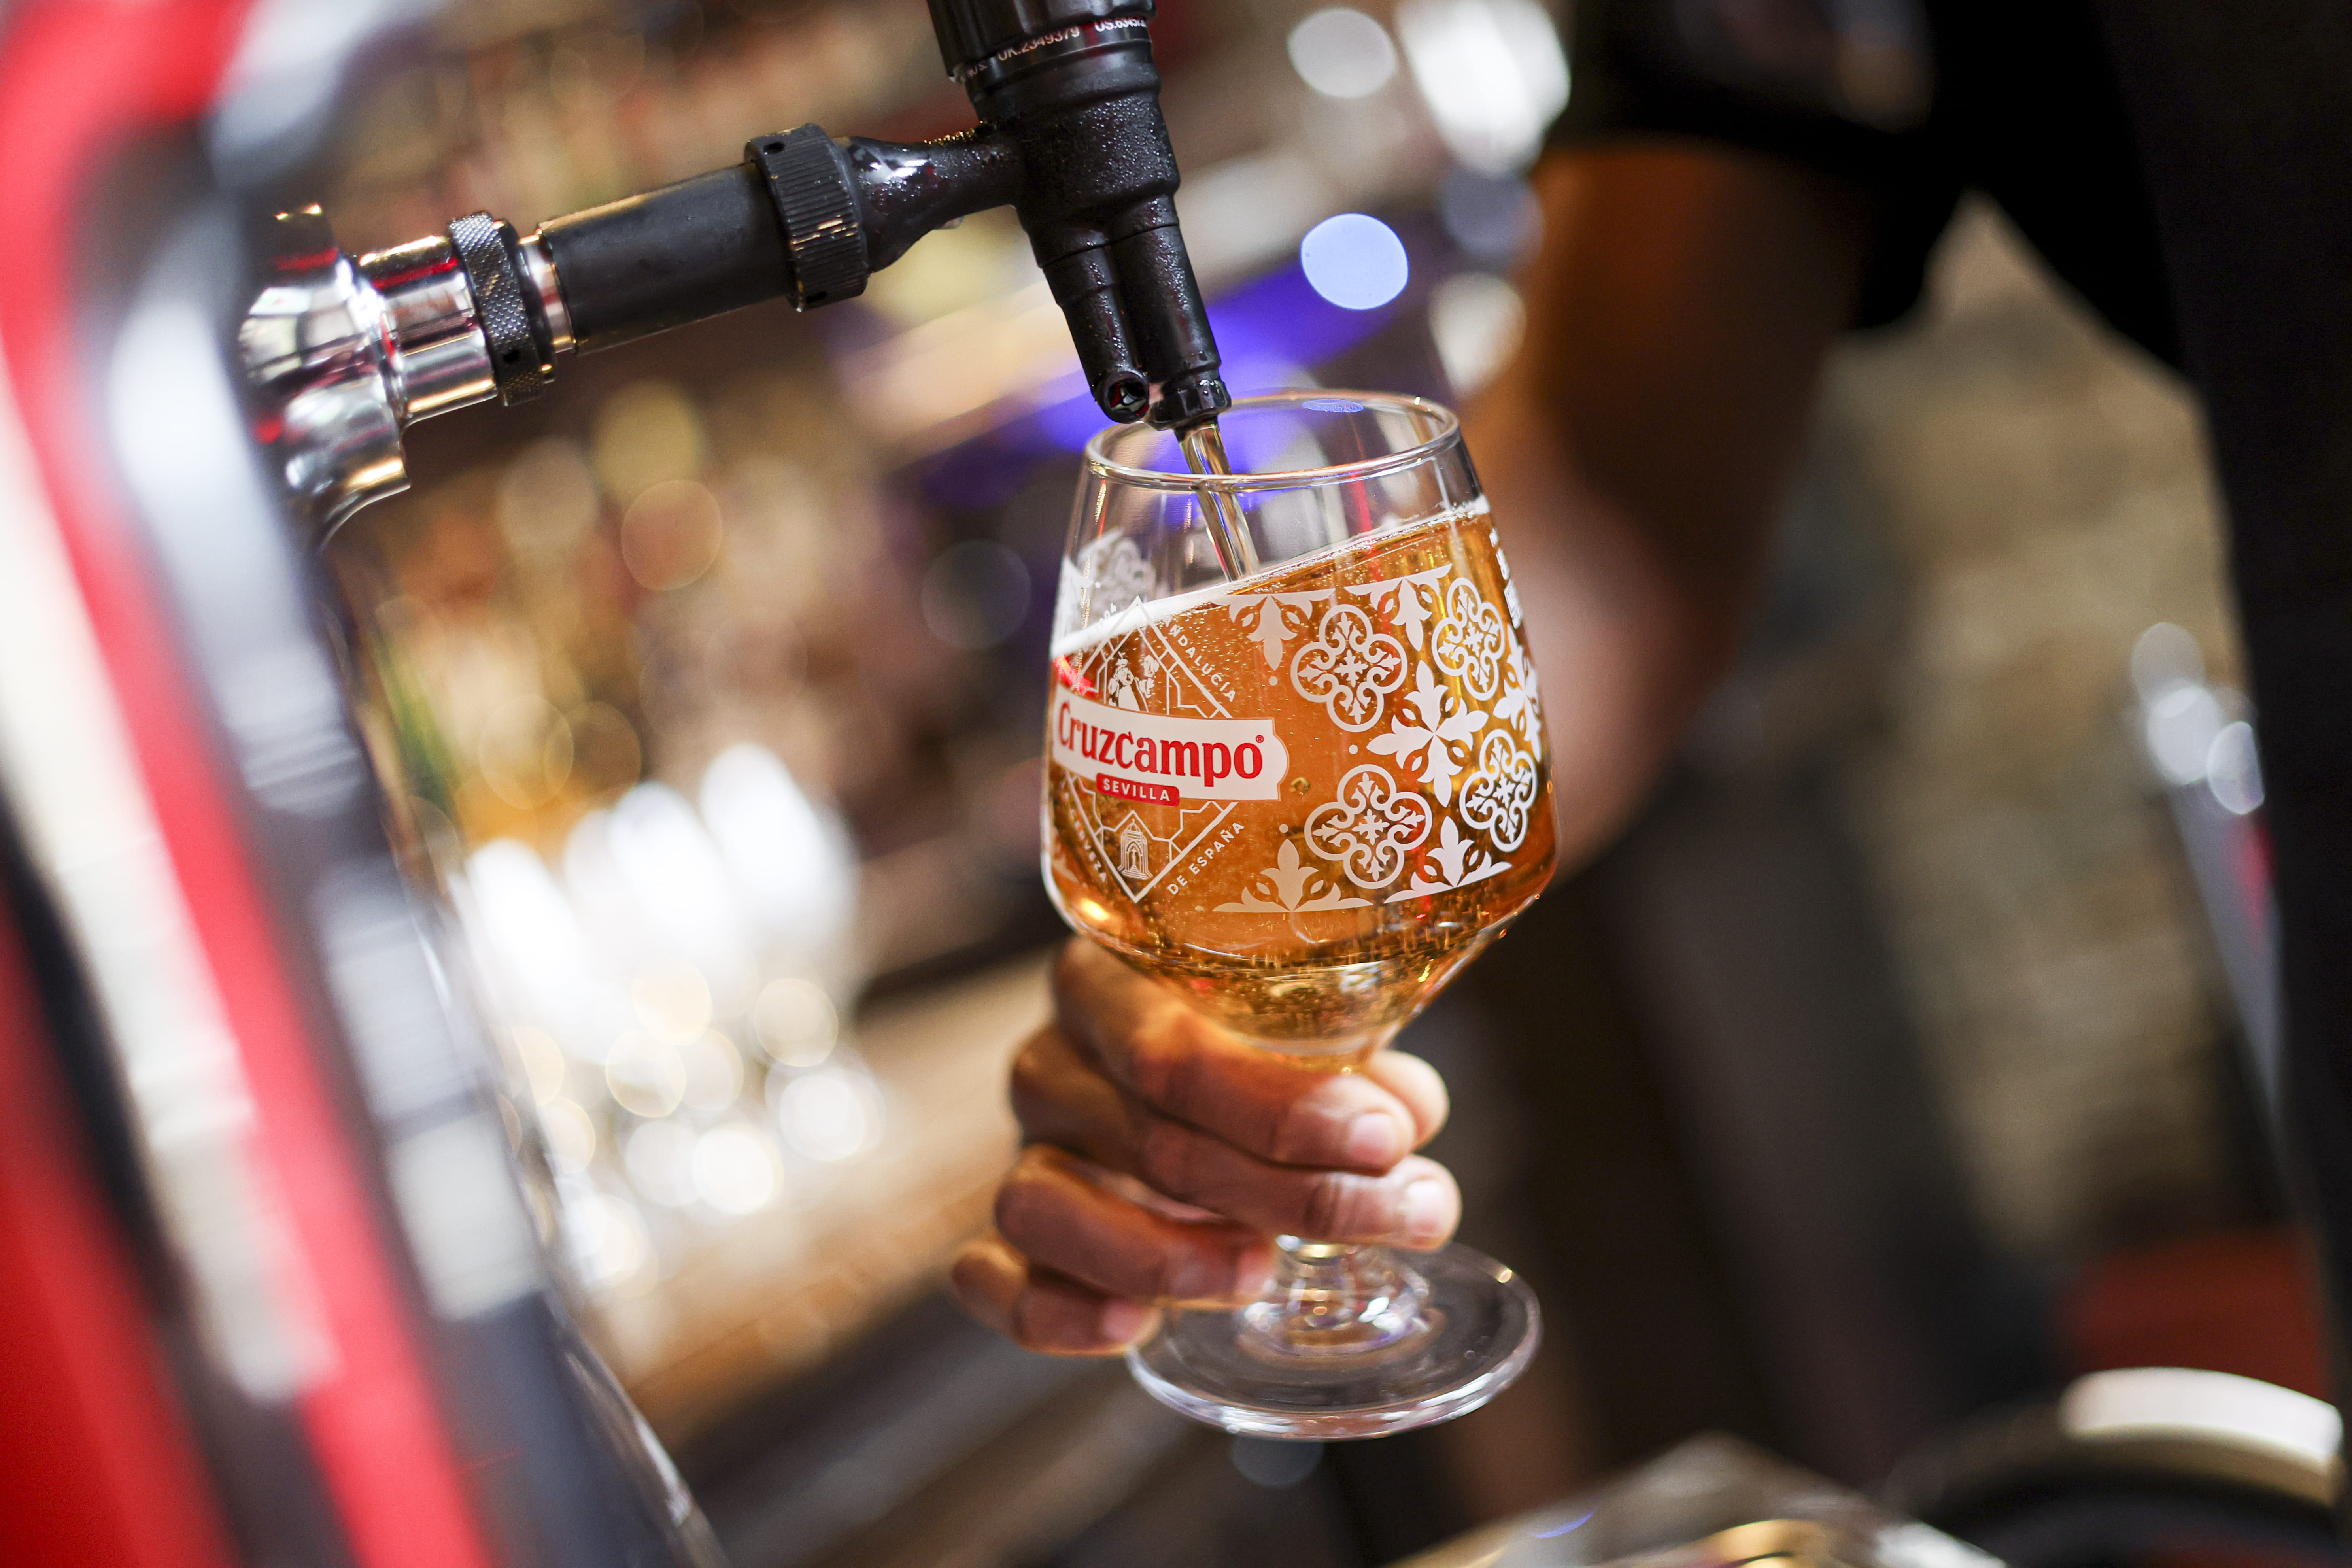 A glass of Cruzcampo being poured